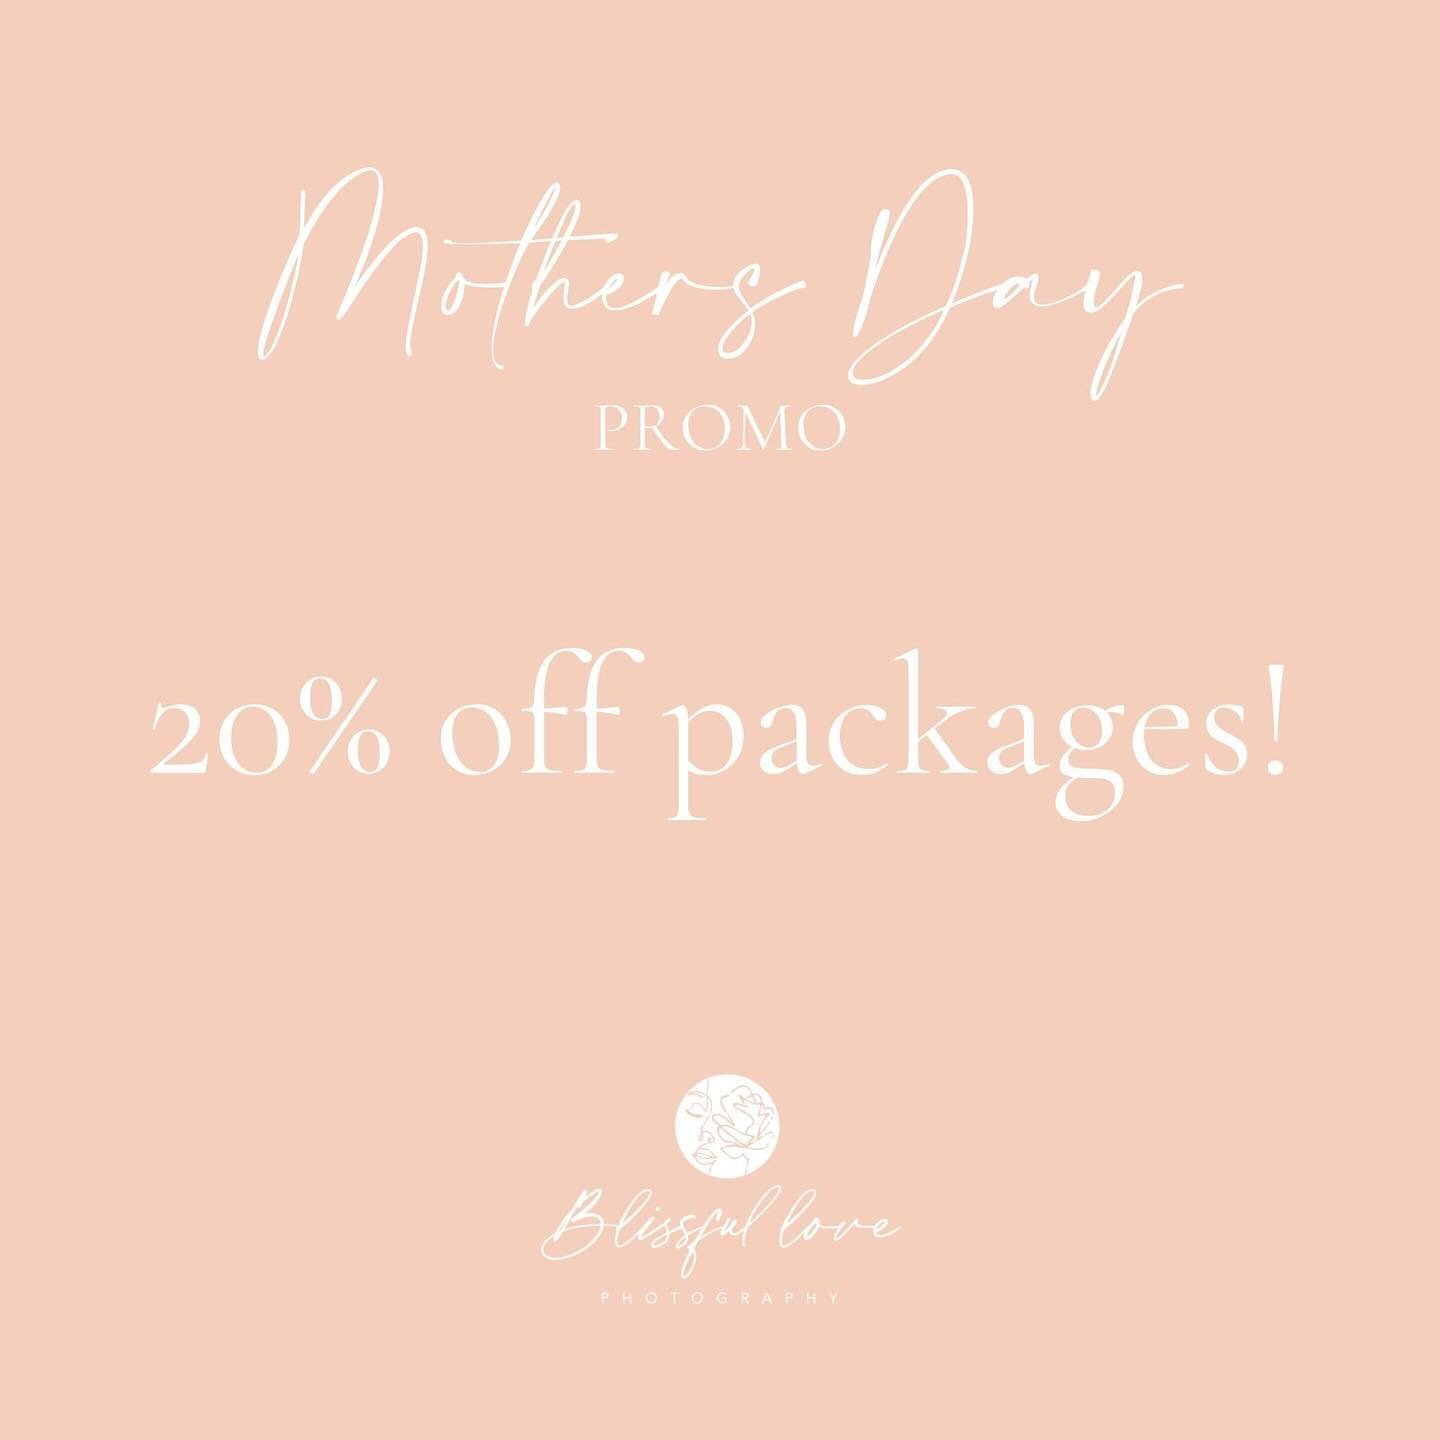 MOTHER&rsquo;S DAY PROMO - 20% off packages until the end of April! 😍

Mumma&rsquo;s send this one to your partner or kids so they can get it for you for Mother&rsquo;s Day!

May this be your reminder that you deserve to be in the photos and in the 